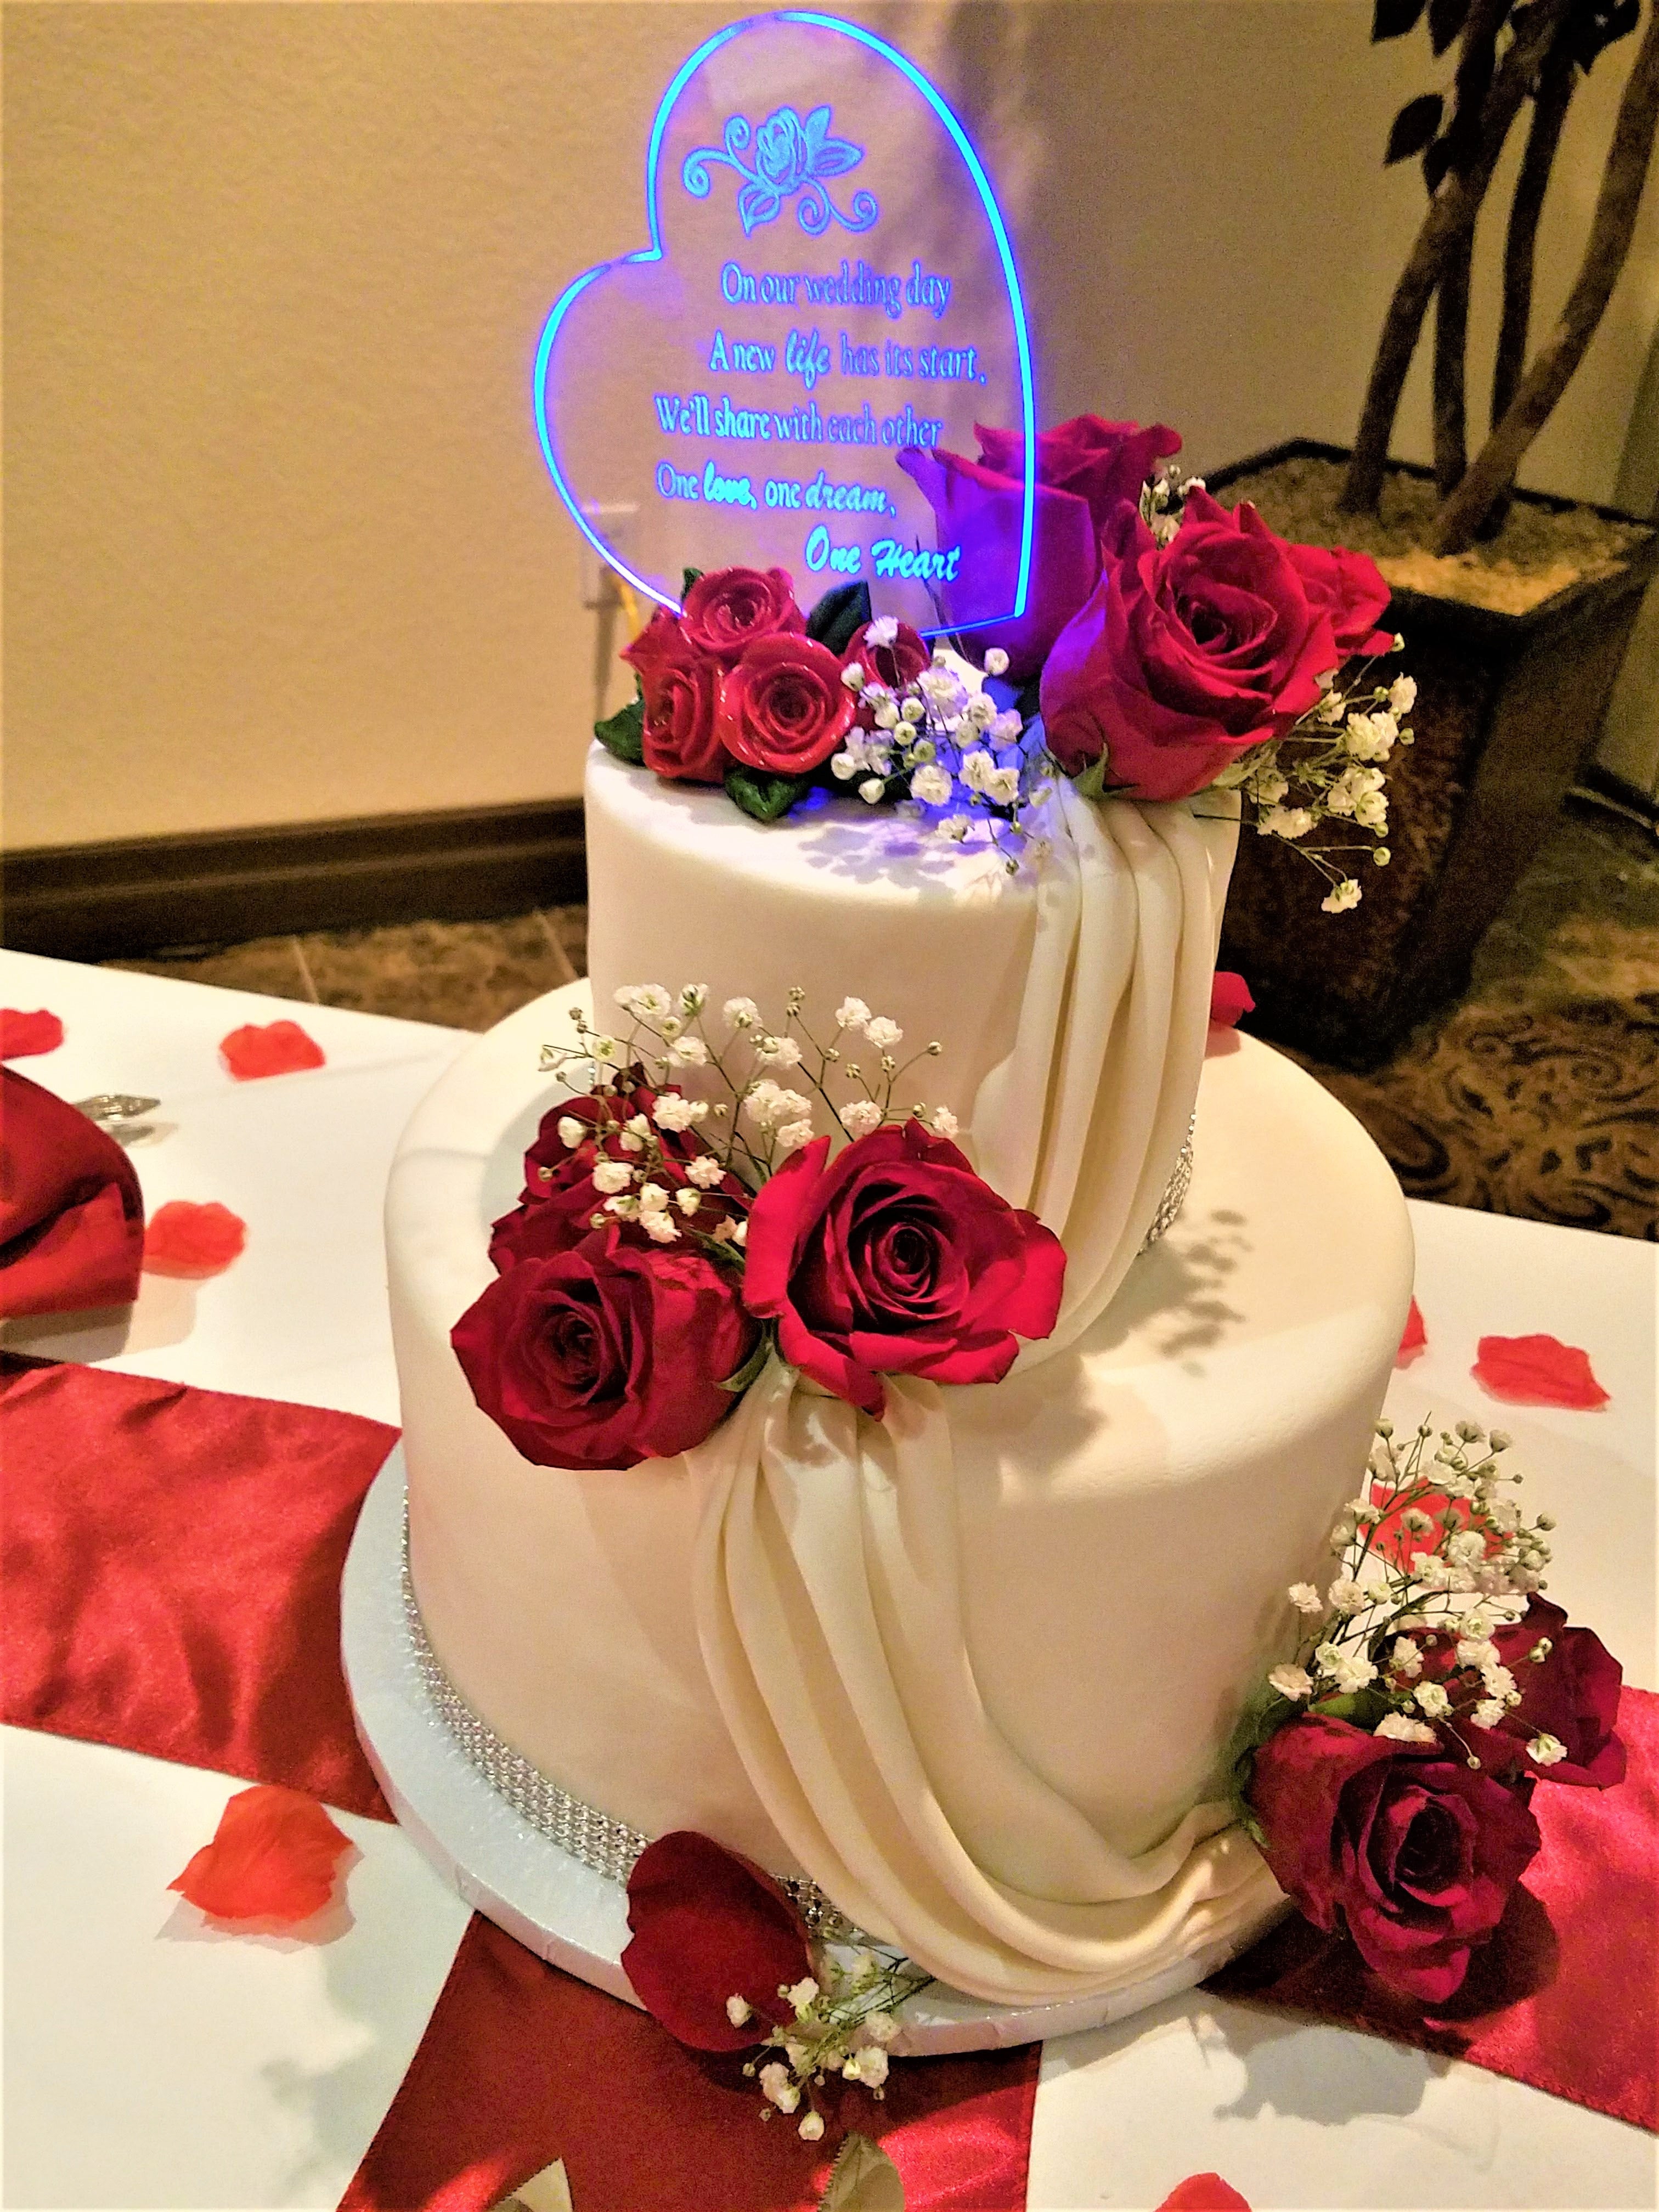 New Beginning Theme Photo Cake Delivery In Delhi NCR